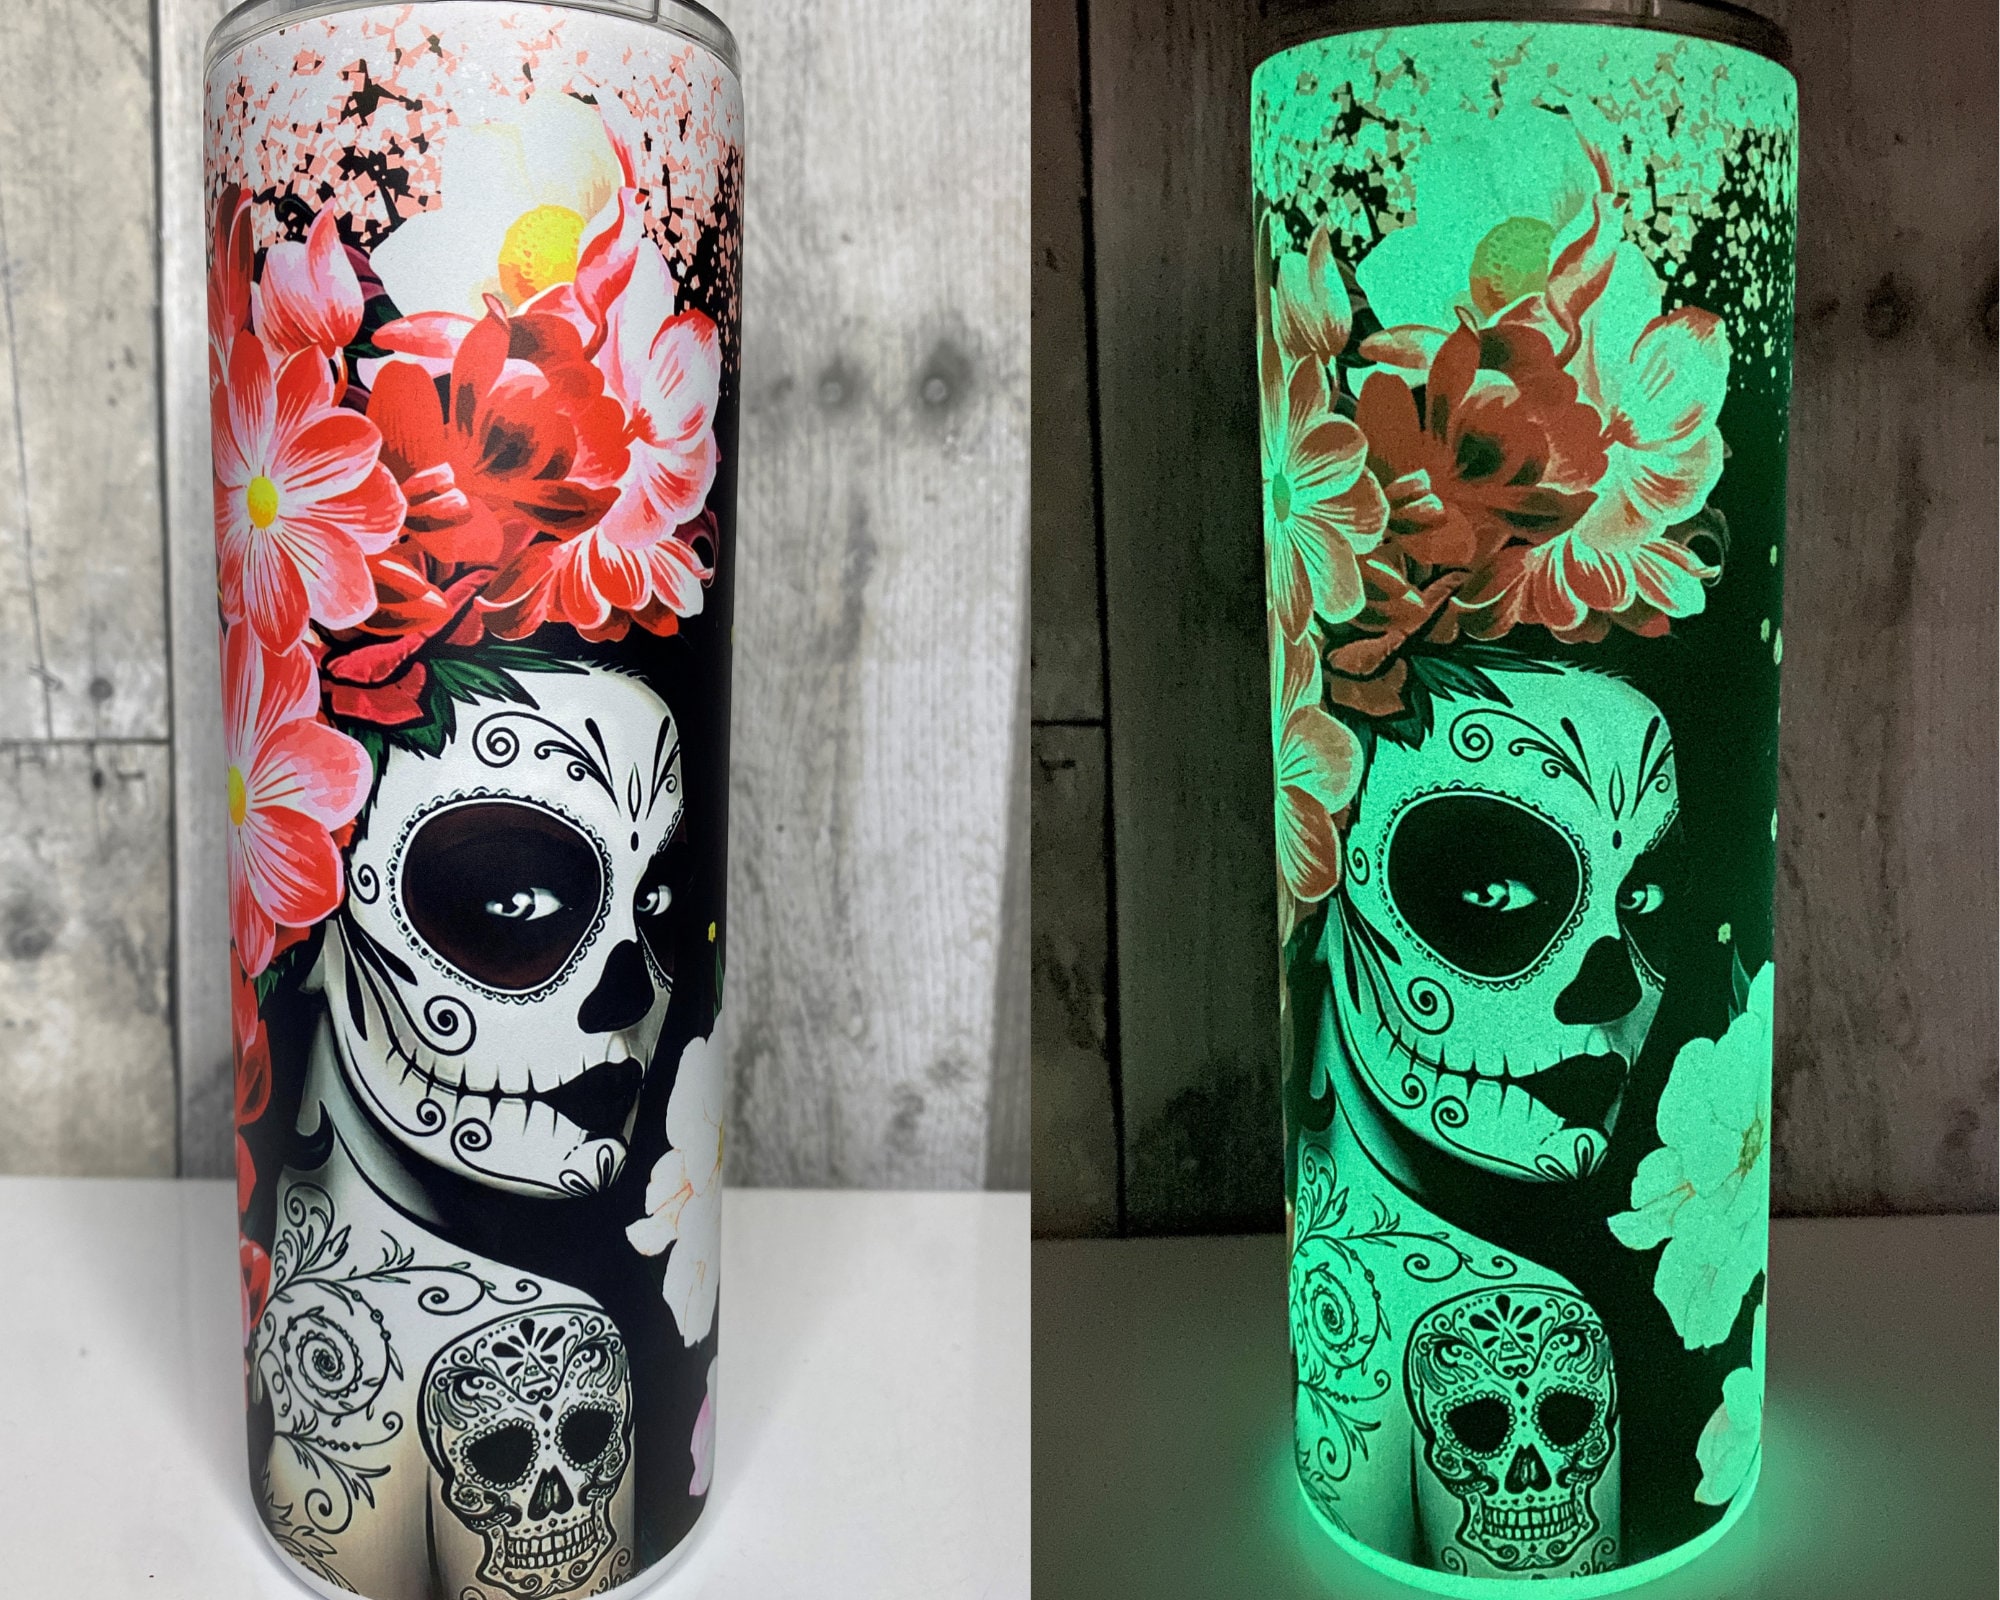 Sugar Skull 32 Oz Travel Tumbler With Lid and Straw 